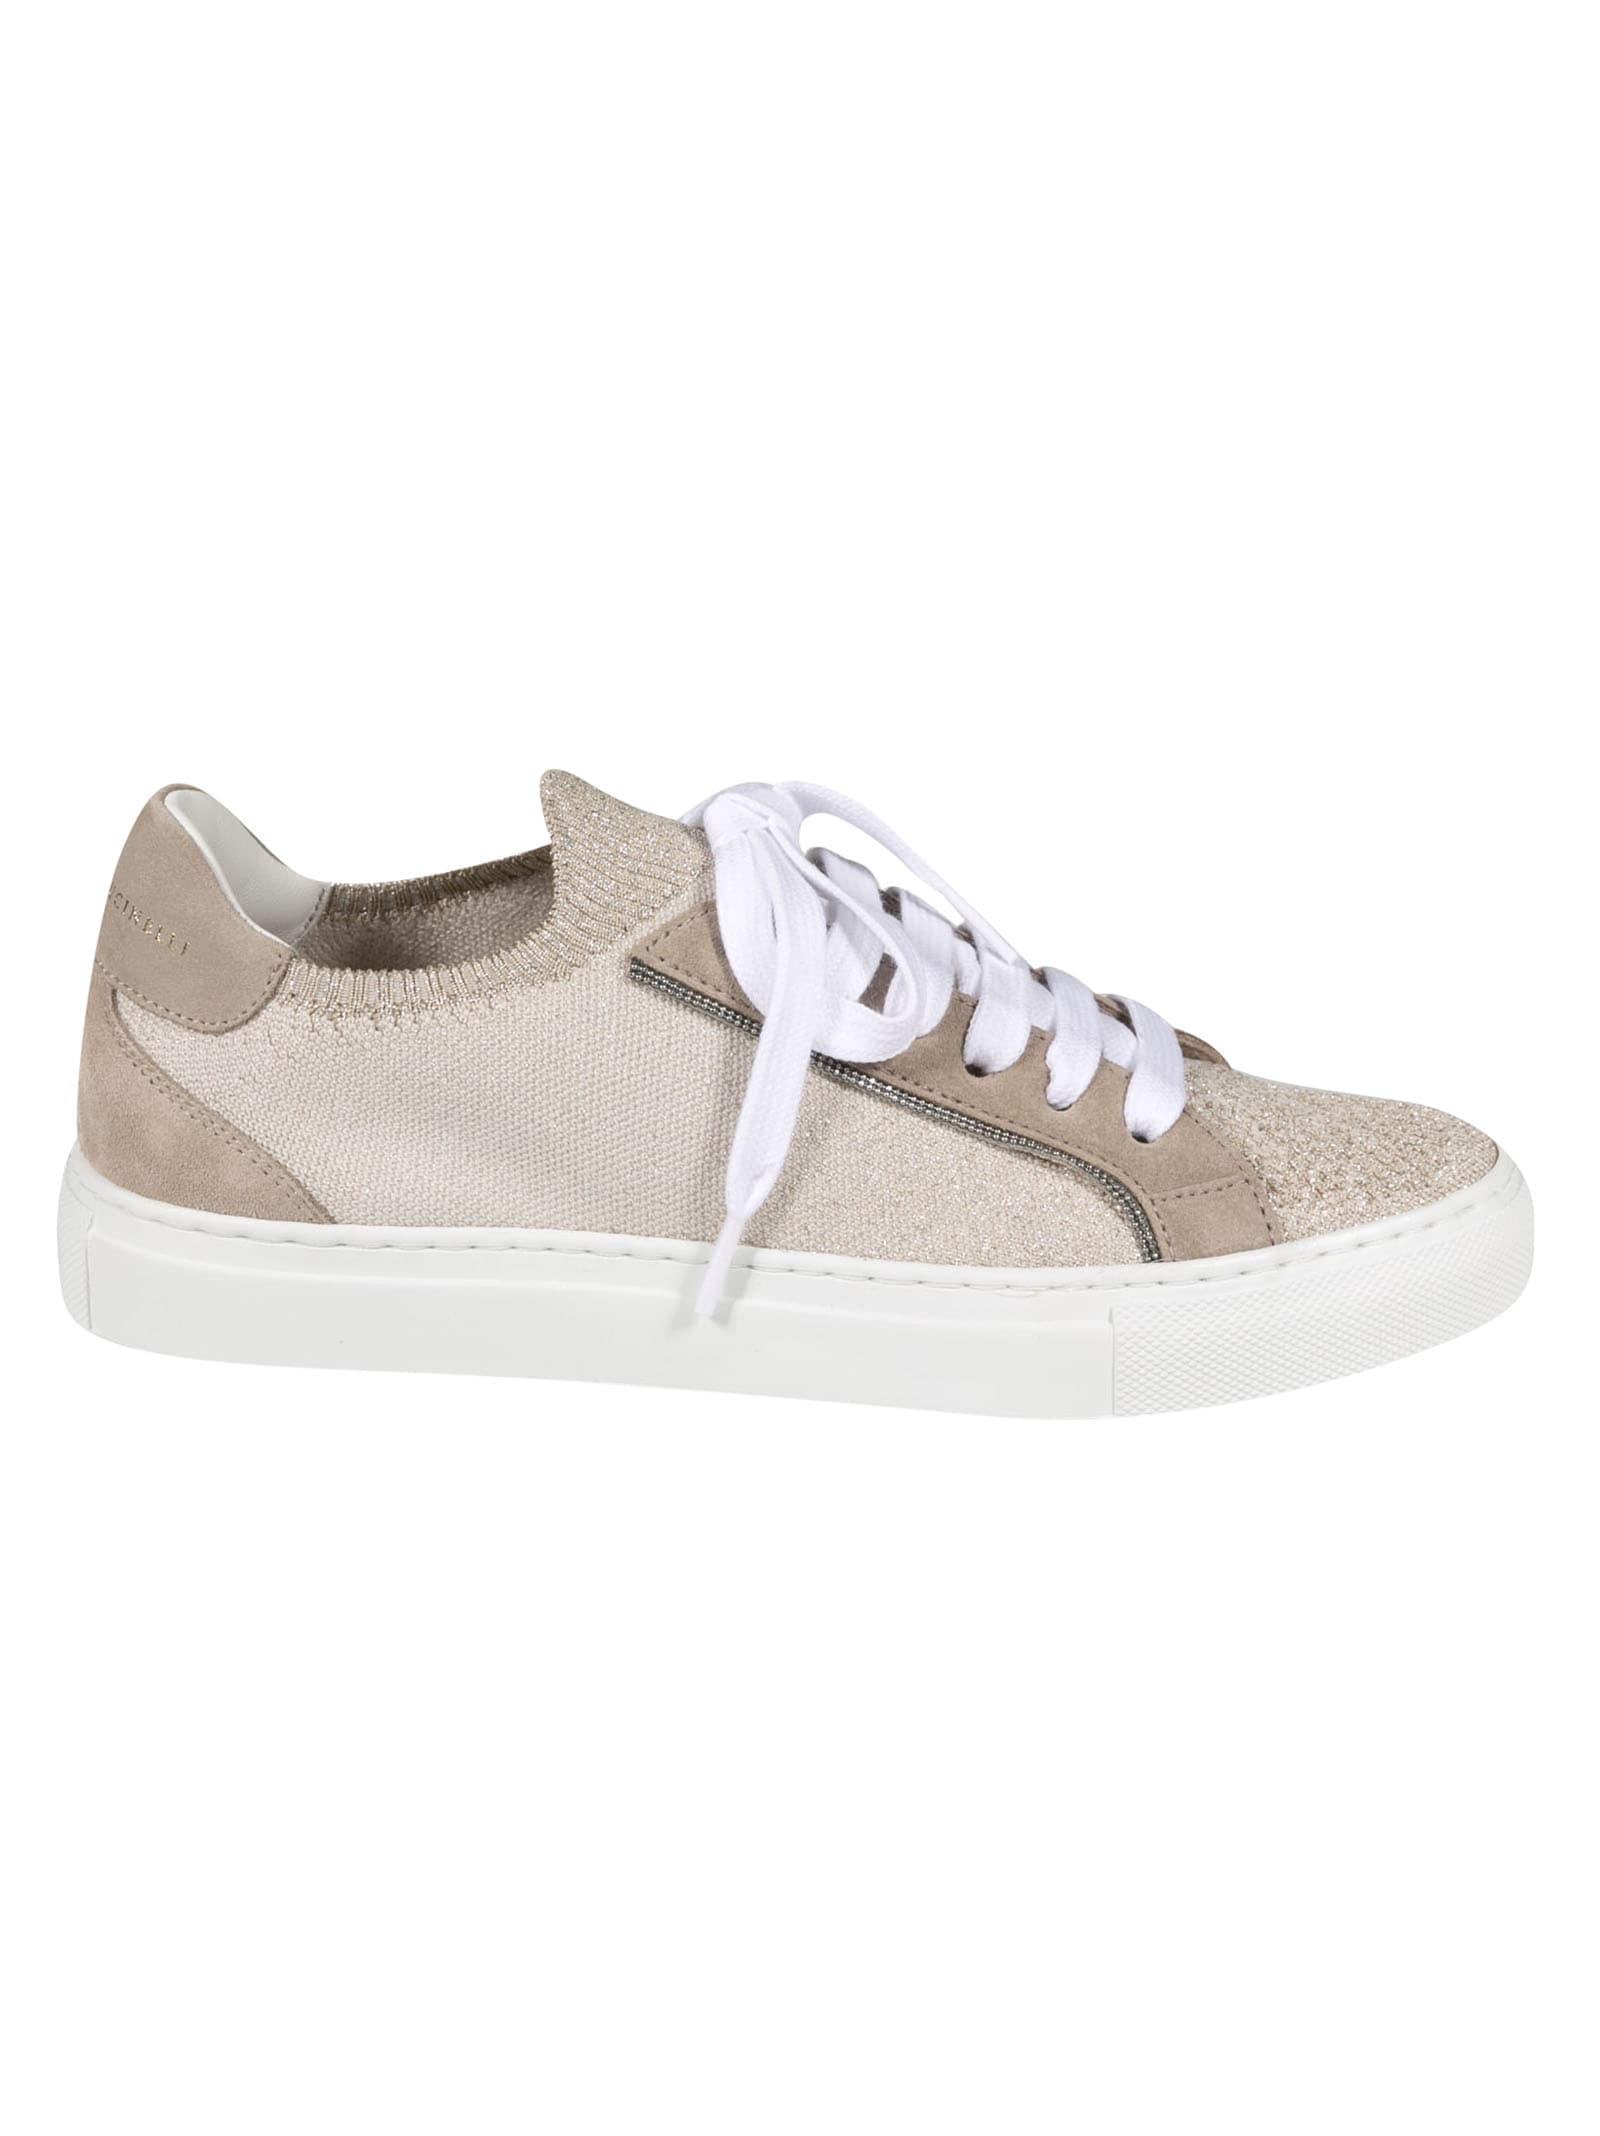 BRUNELLO CUCINELLI CLASSIC LOW-TOP LACE-UP SNEAKERS,MZ34G1335-C1266